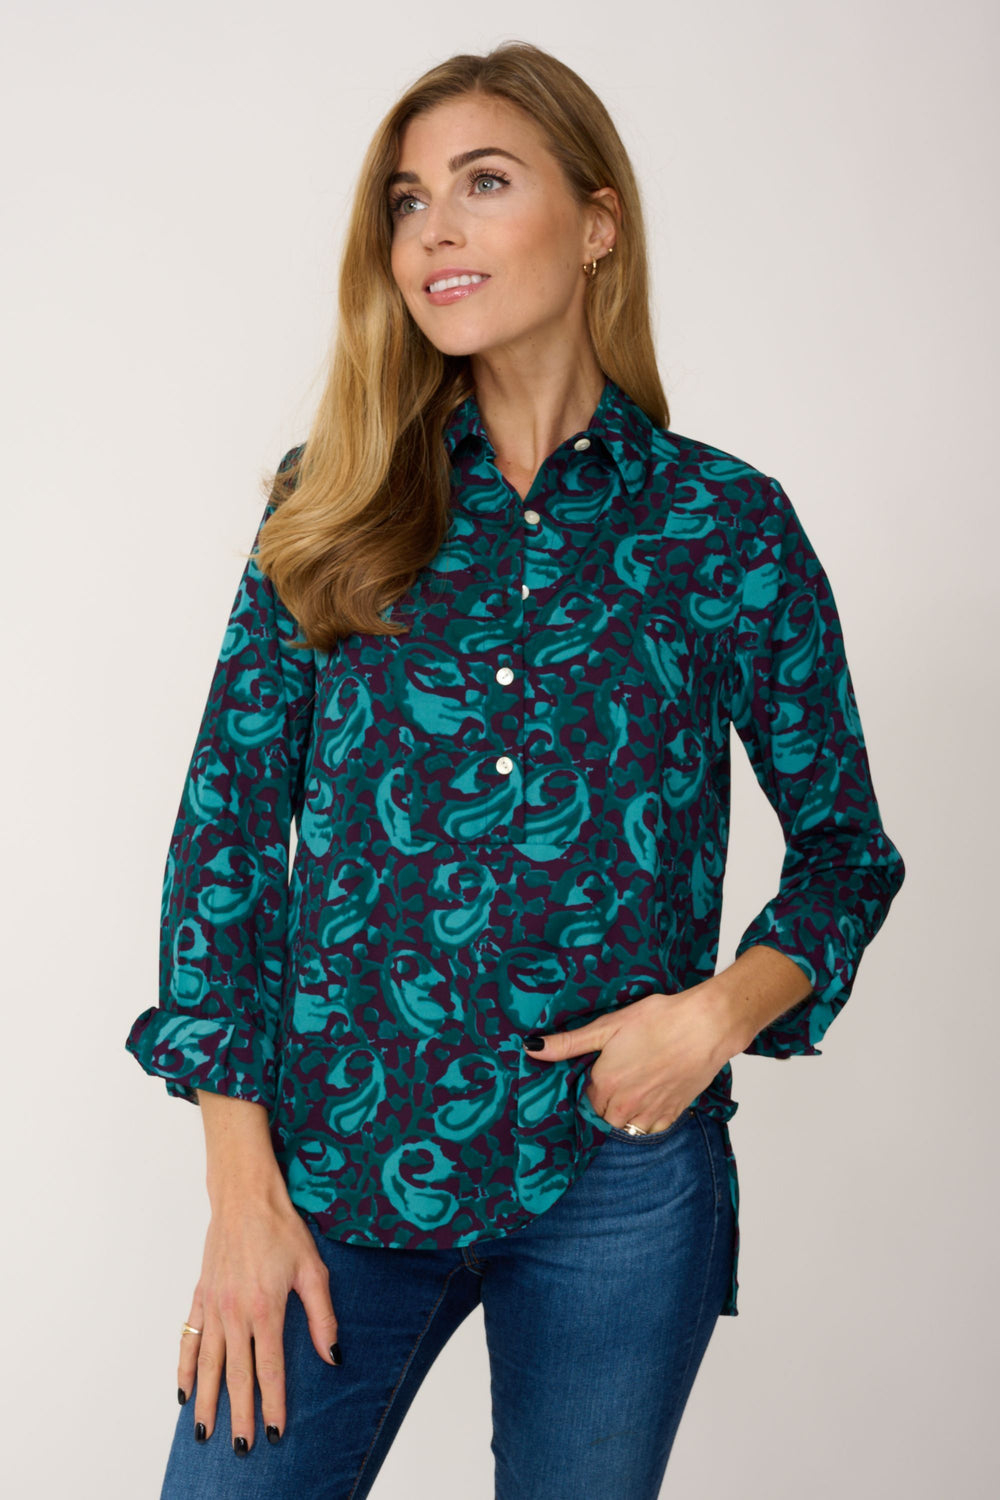 At Last Soho Shirt in Teal & Purple Swirl Front Lifestyle 2 | Dotique